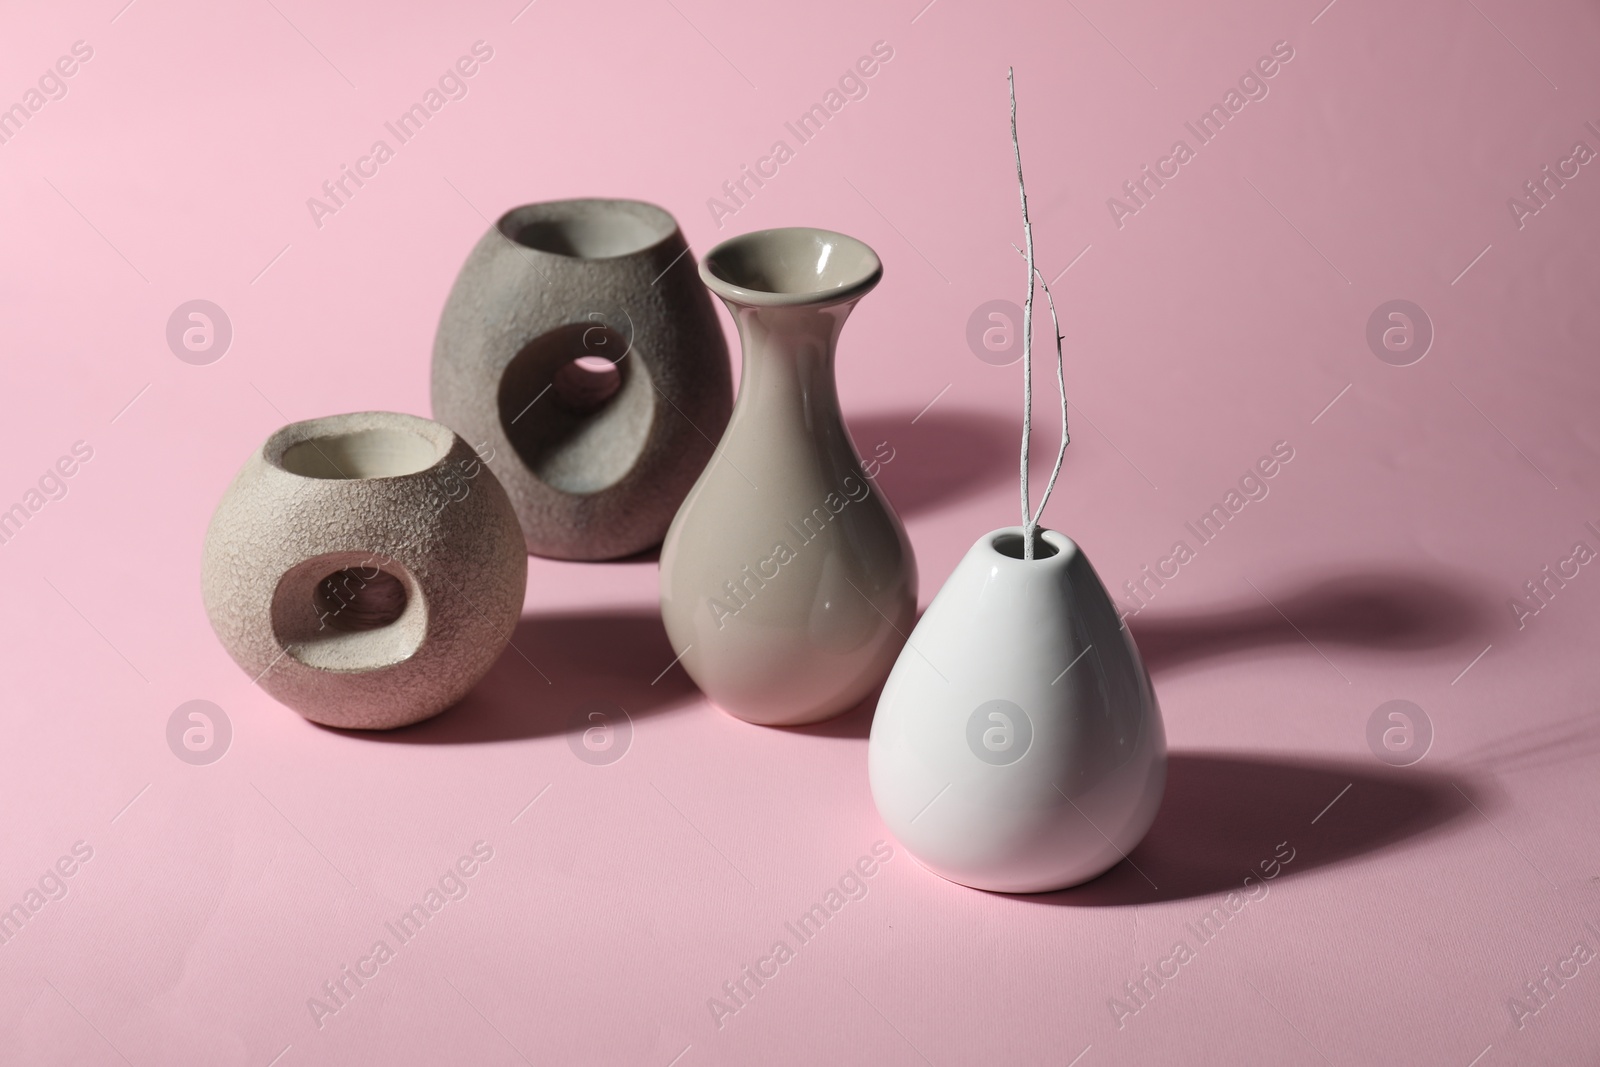 Photo of Different stylish vases and branch on pink background